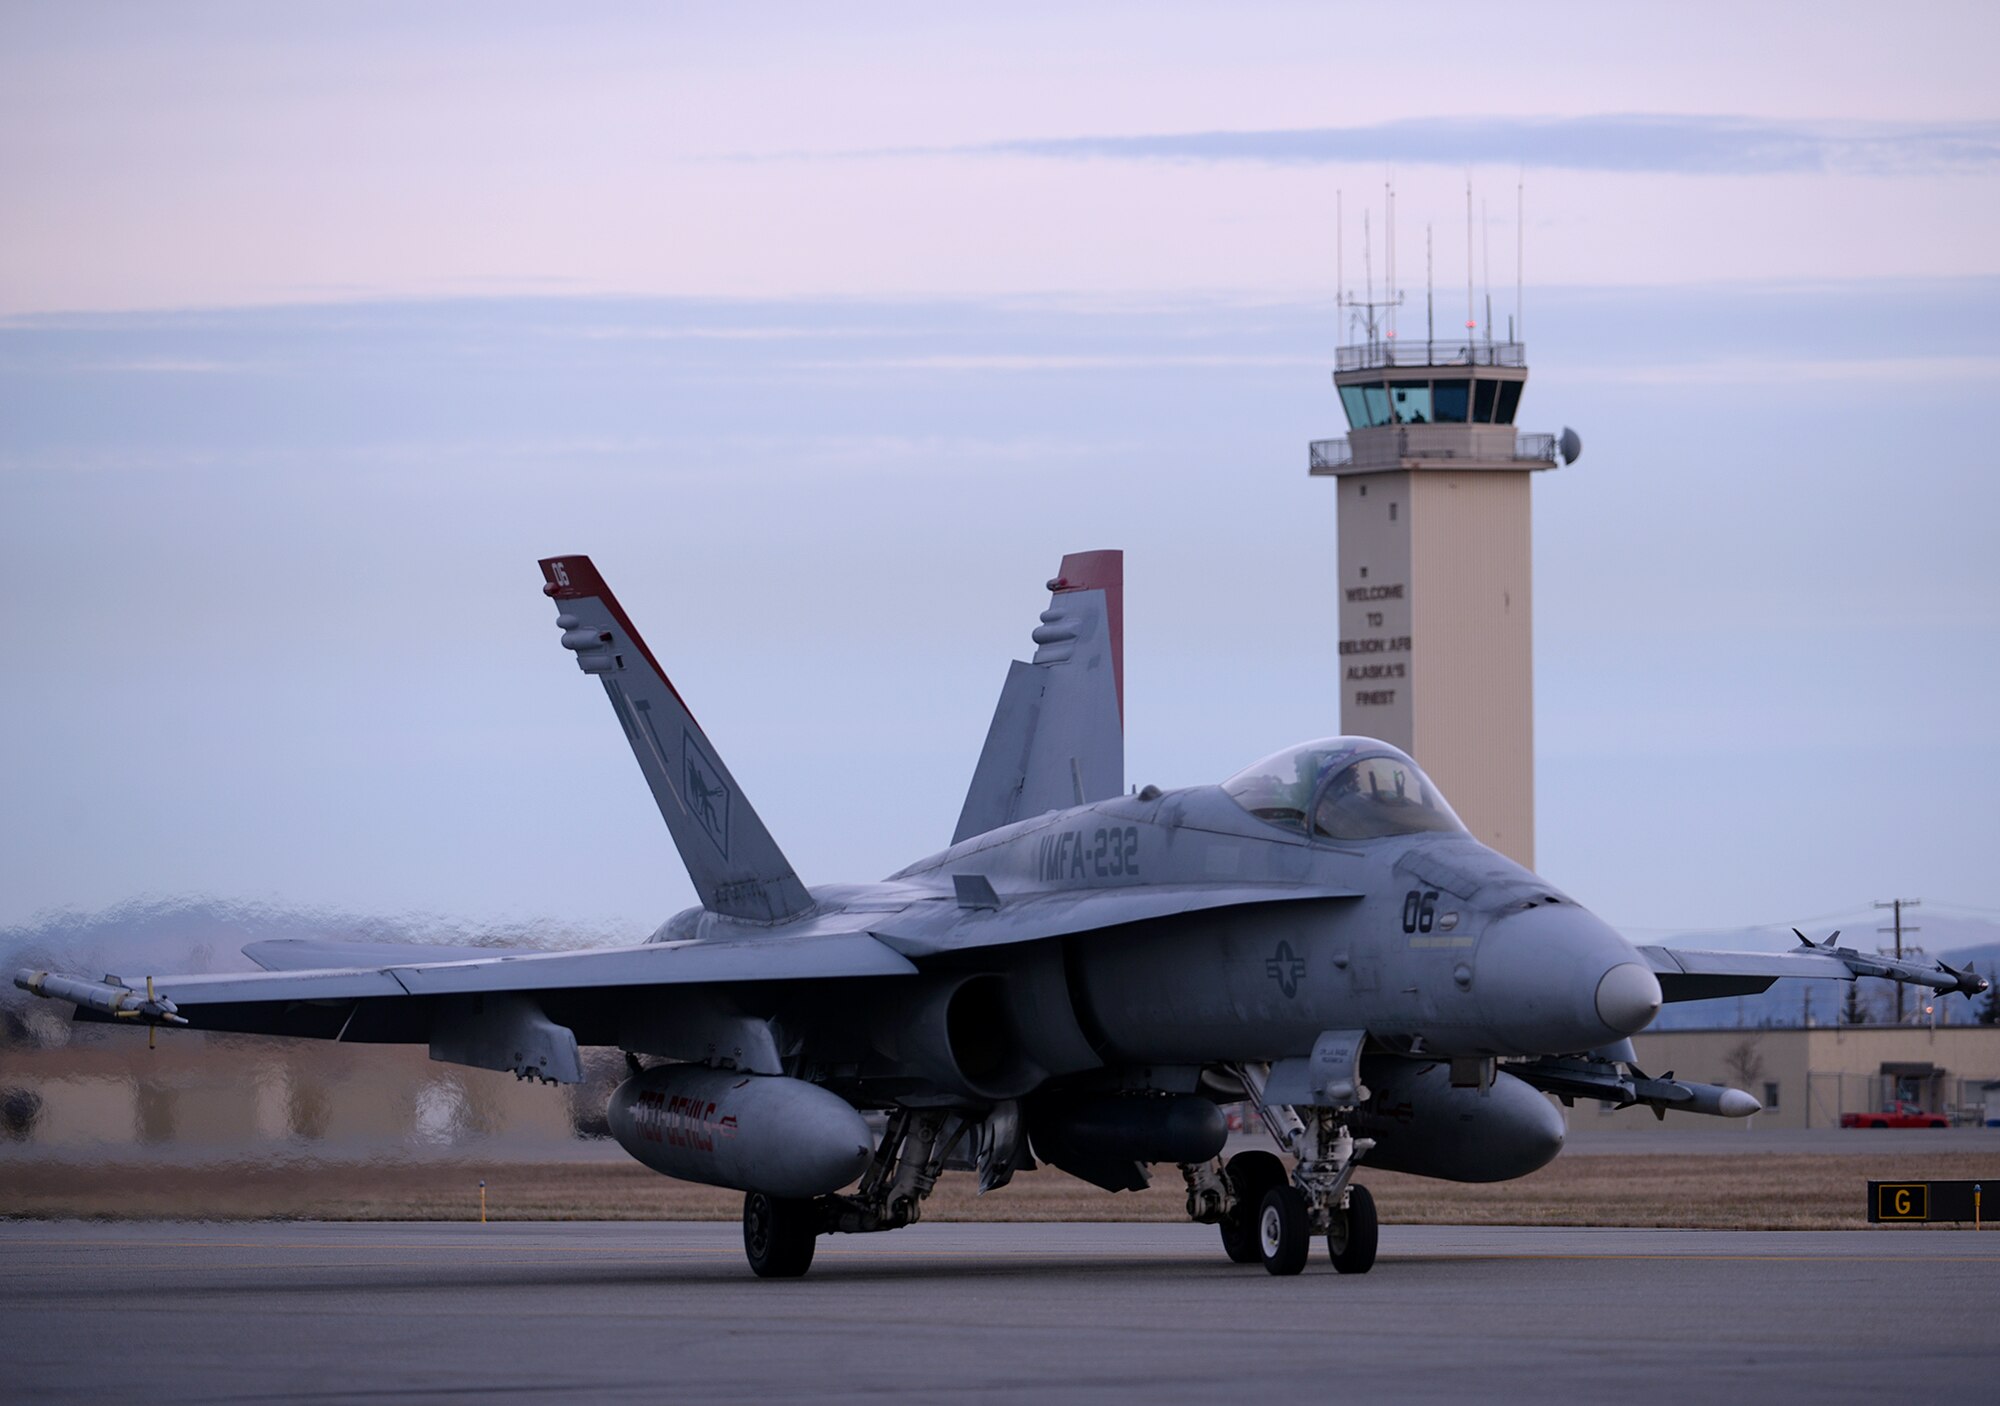 A U.S. Marine Corps F/A-18C Hornet aircraft with Marine Fighter Attack Squadron (VMFA) 232 out of Marine Corps Air Station Miramar, Calif., taxis past the Eielson Air Force Base, Alaska, air traffic control tower Oct. 10, 2016, in preparation for the first RED FLAG-Alaska (RF-A) 17-1 mission. RF-A is a series of Pacific Air Forces commander-directed field training exercises for U.S. and partner nation forces, which enables U.S. Marines in units like VMFA-232 to prepare for future combat and contingency operations in a realistic threat environment inside the Joint Pacific Alaska Range Complex. (U.S. Air Force photo by Master Sgt. Karen J. Tomasik)